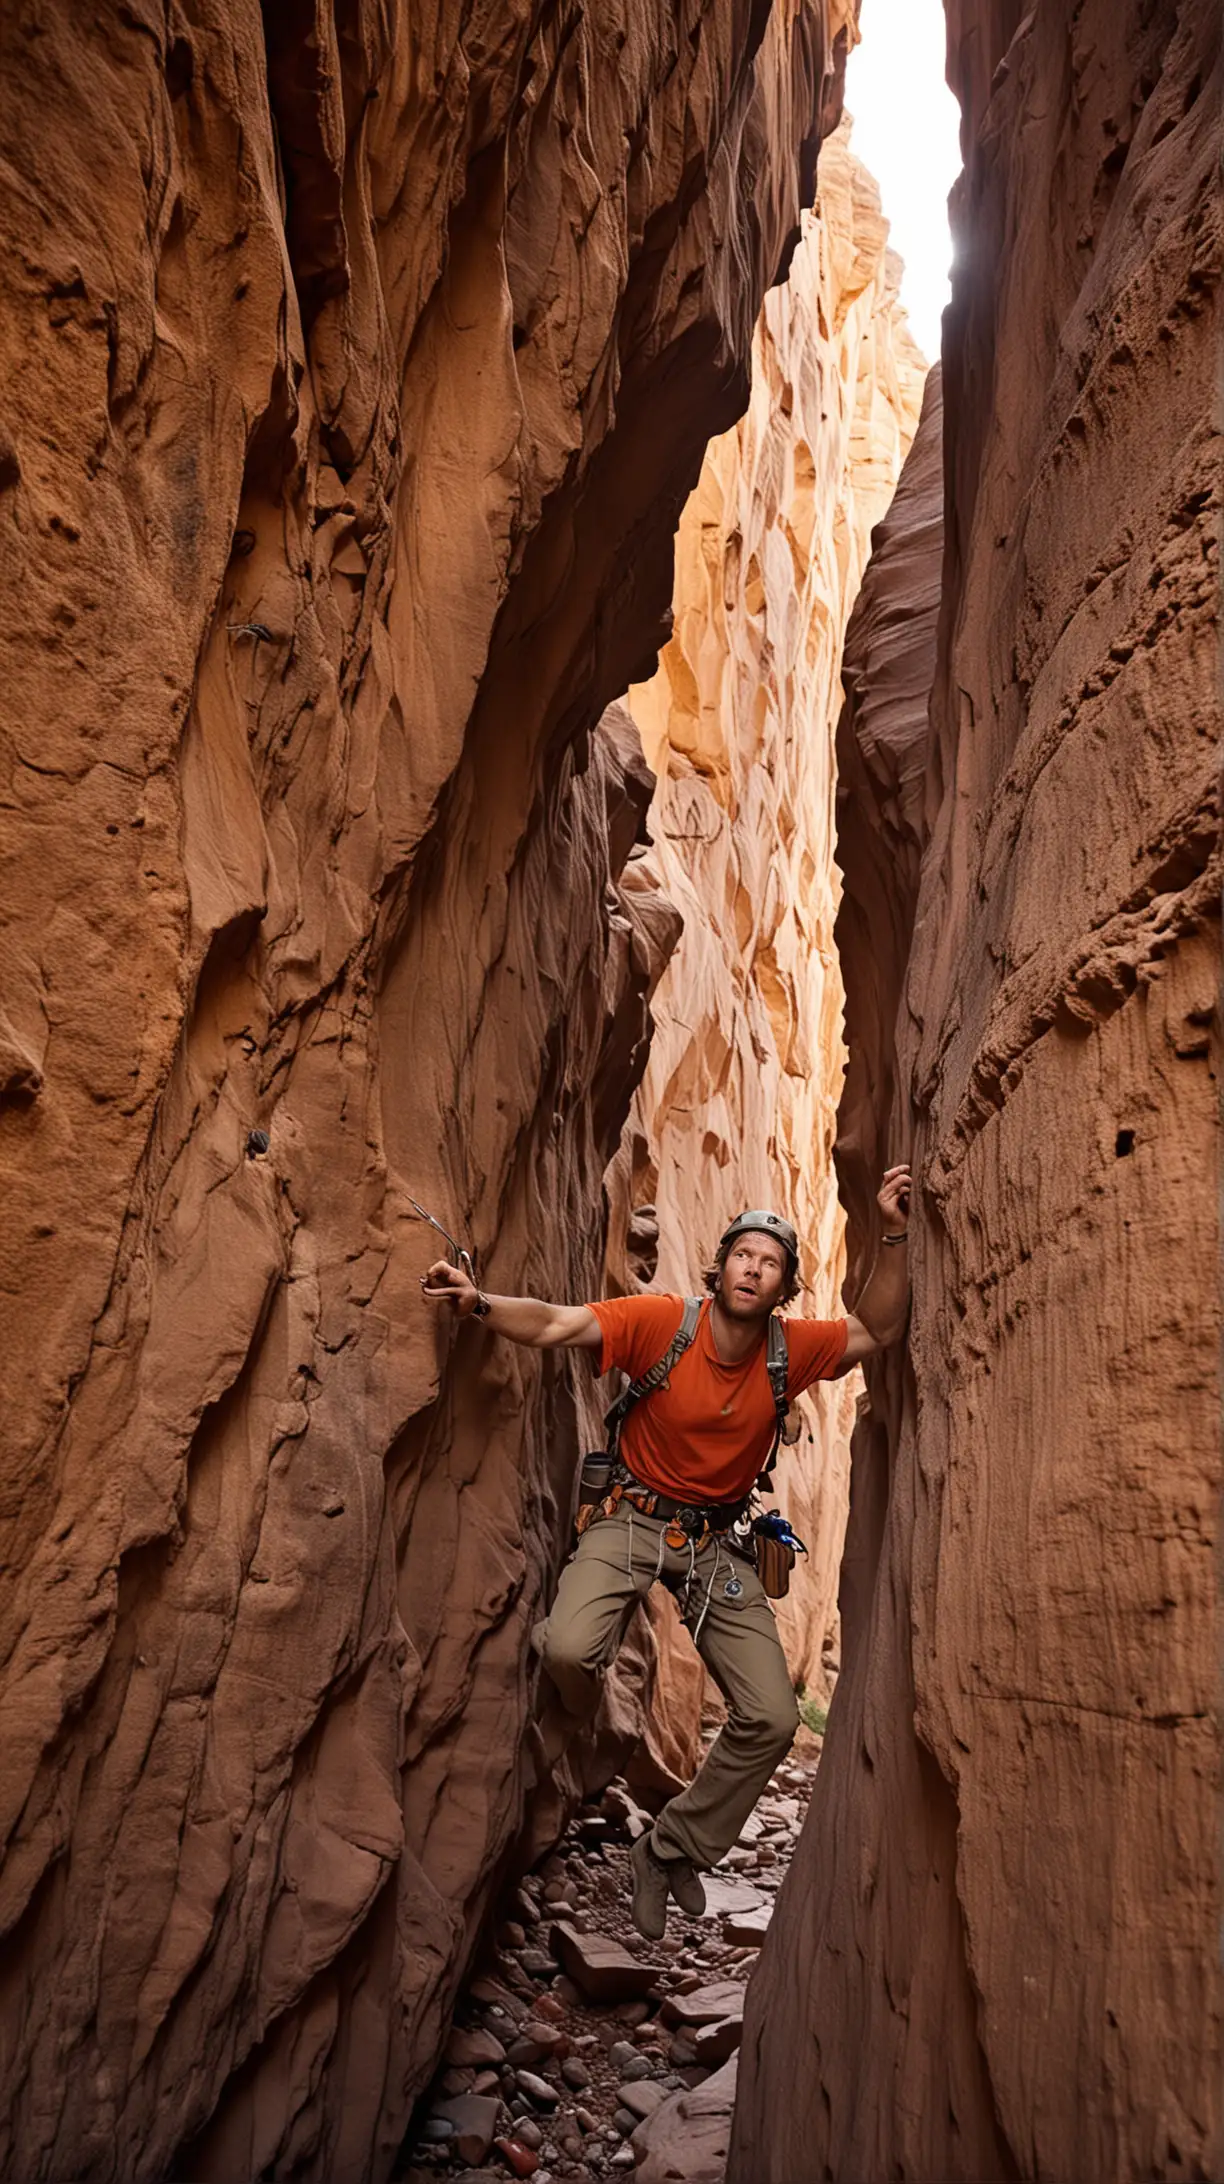 Create a compelling and intense cover image for a video titled "Aron Ralston: The 127-Hour Ordeal". The focus should be on 27-year-old American climber Aron Ralston, captured in a moment of critical decision. He should be depicted with a determined and grim expression, his right arm trapped beneath a massive boulder in the narrow confines of a Utah canyon.

The background should feature the rugged, towering red rock walls of the canyon, casting deep shadows and highlighting the isolation and severity of the situation. Aron’s left hand should clutch a small, blunt pocket knife, symbolizing his desperate and courageous attempt to free himself.

Incorporate elements like a water bottle and scattered climbing gear nearby, indicating his dwindling resources. The title "127 Hours" should be prominently displayed in a bold, rugged font that conveys the gravity of the situation. Add a tagline such as "The Ultimate Test of Survival and Resilience" to intrigue viewers.